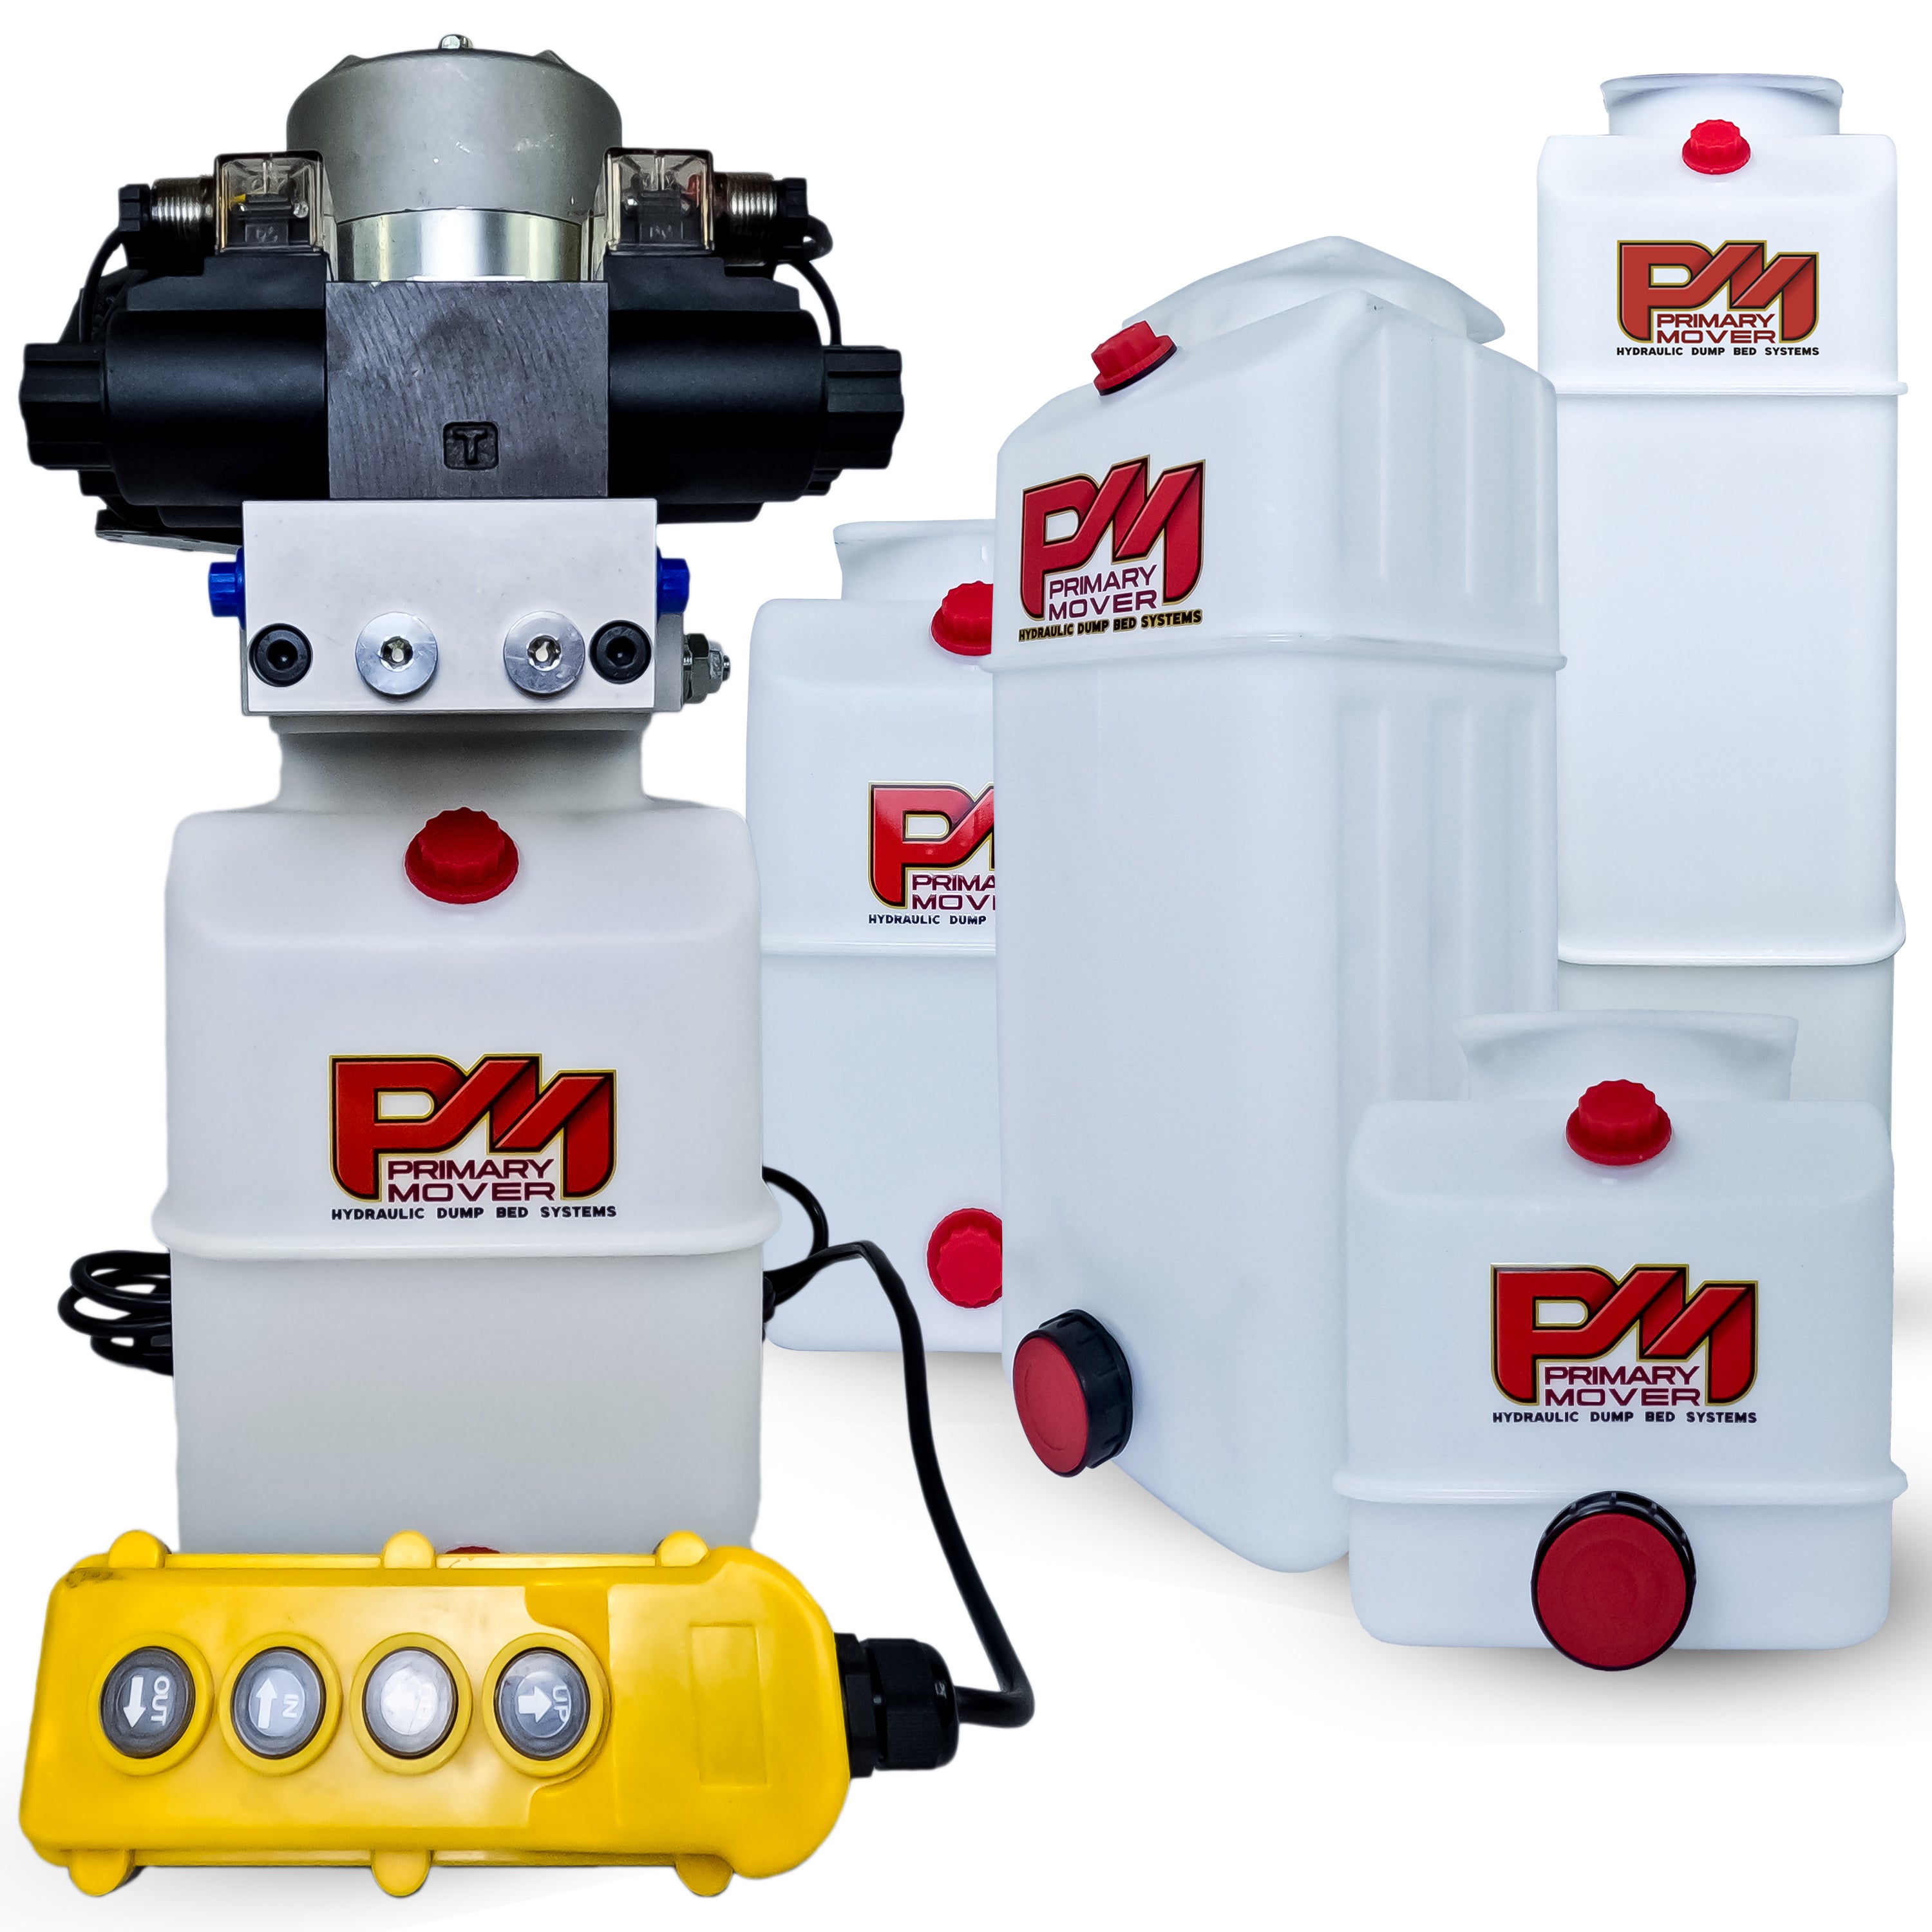 Primary Mover 12V Dual Double-Acting Hydraulic Power Unit | Poly – compact white unit with red buttons, designed for efficient hydraulic operations in dump trailers and trucks.